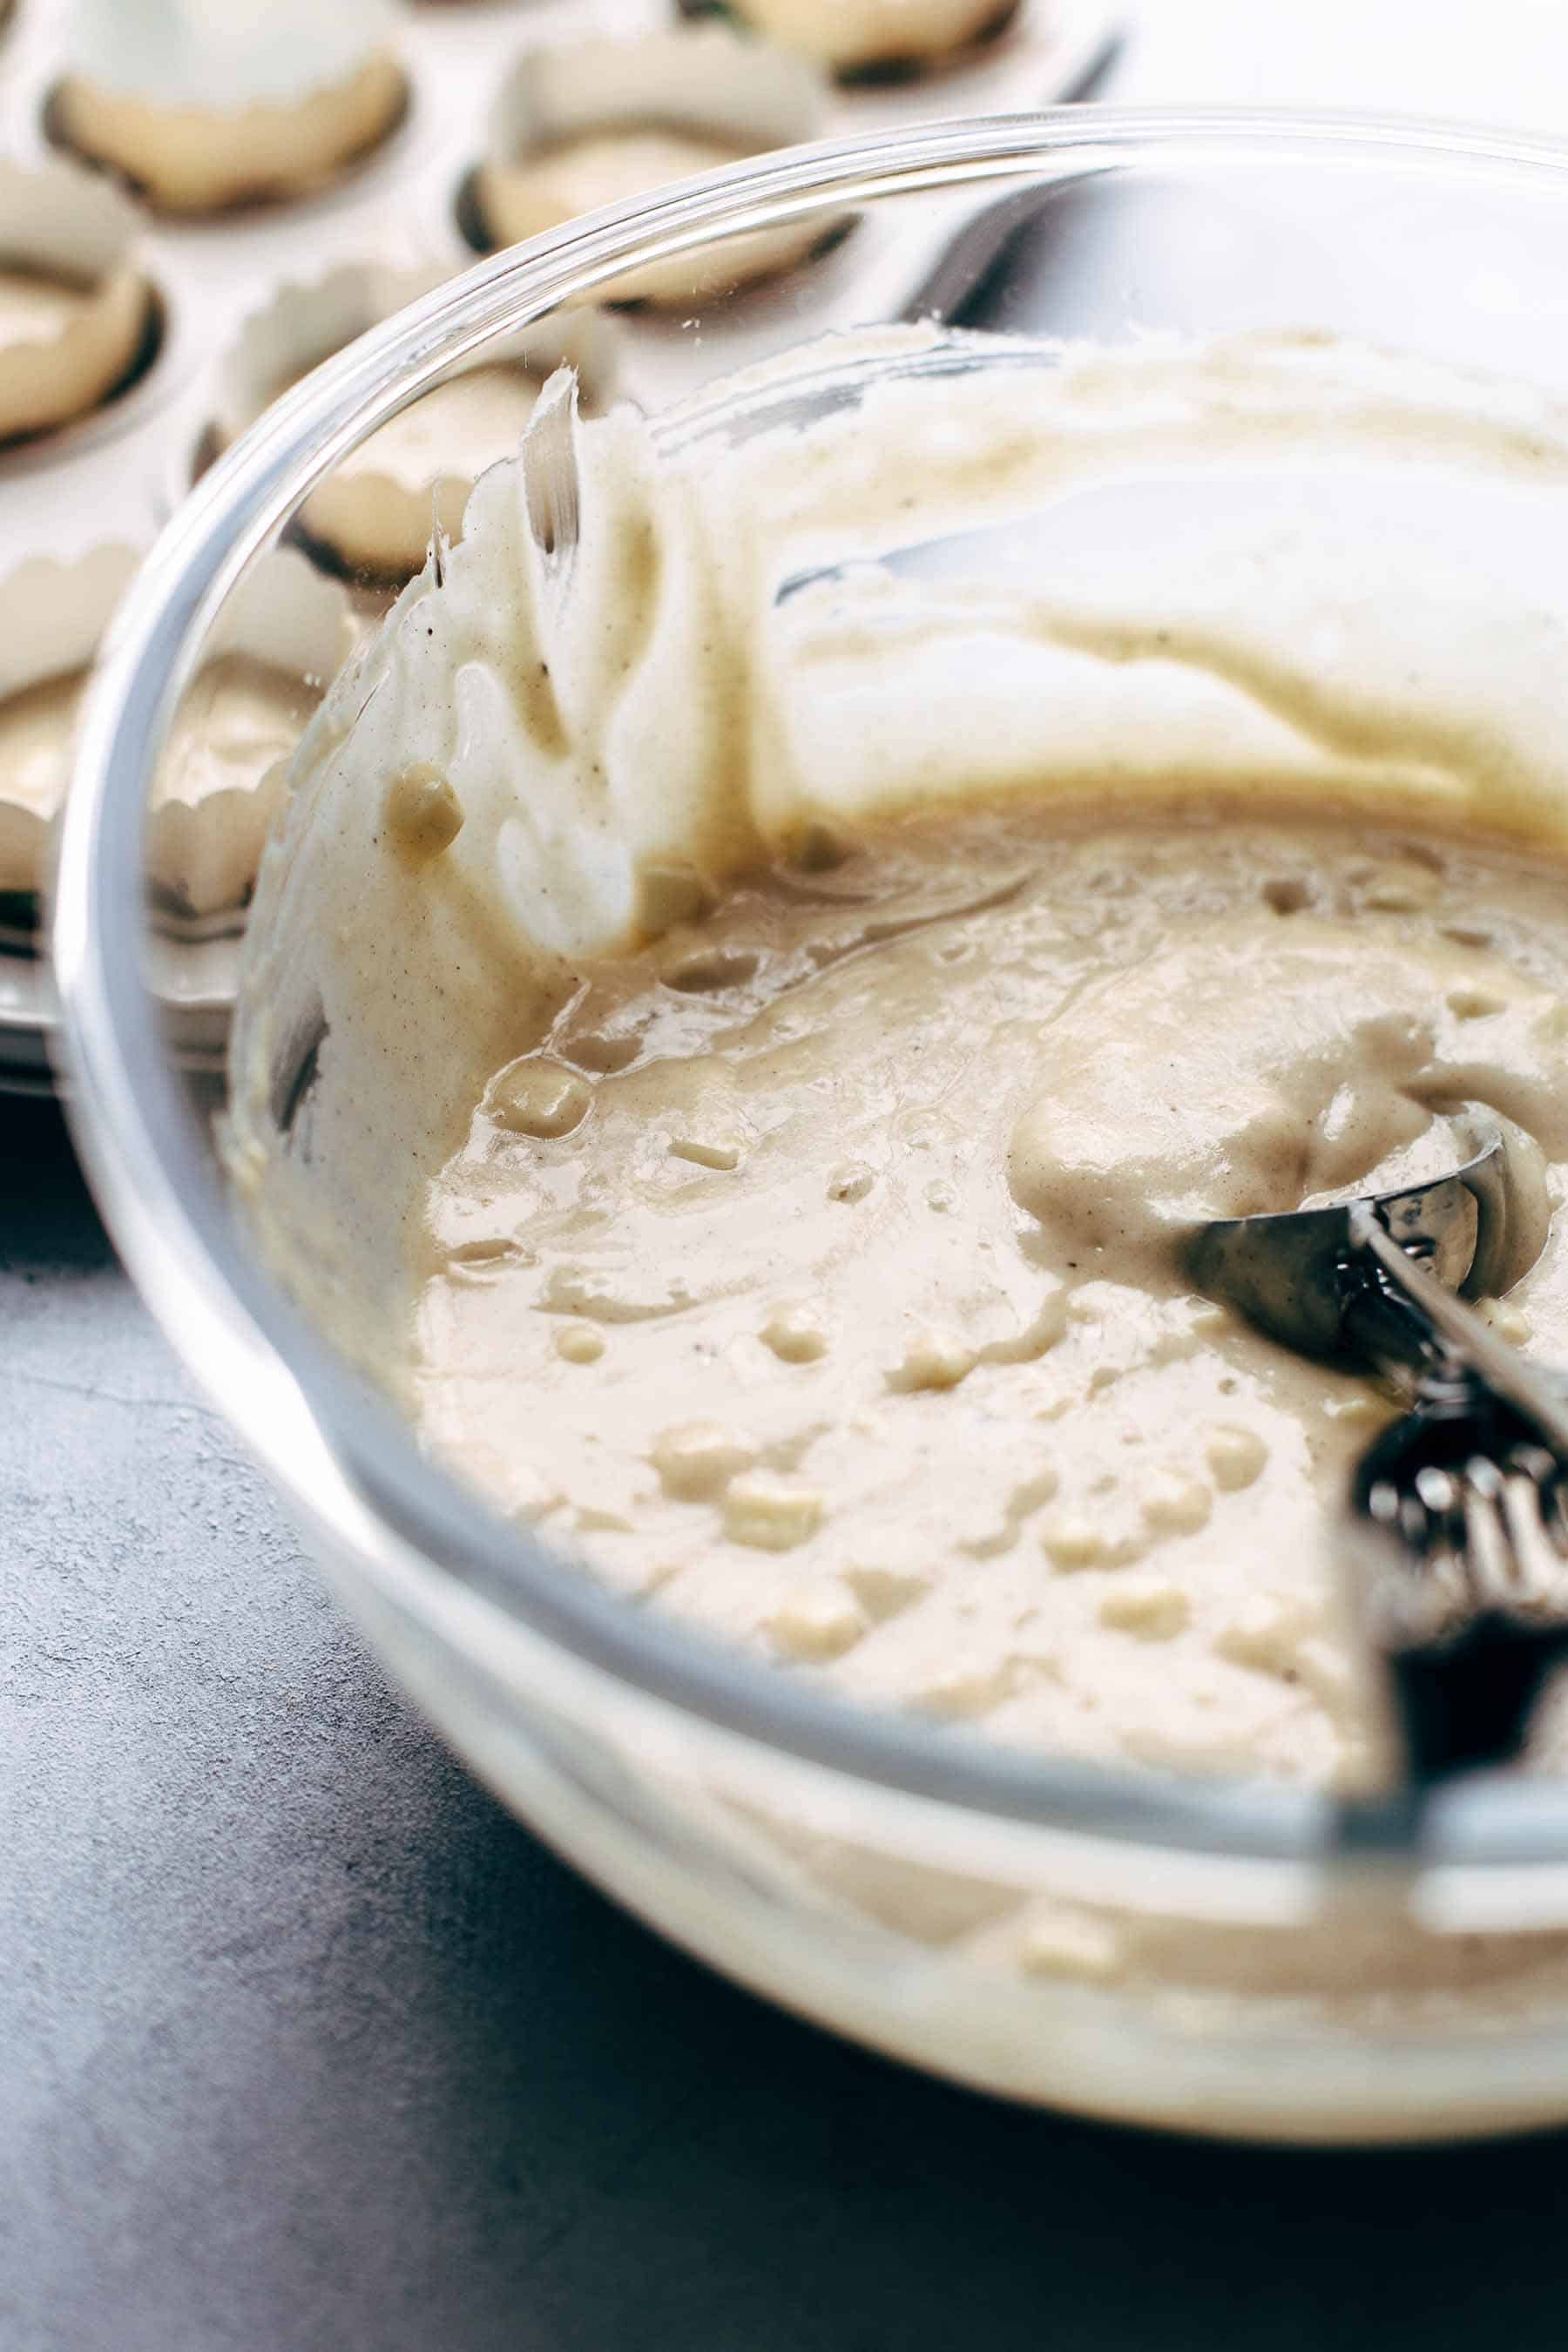 Muffin batter in a large glass mixing bowl with an ice cream scoop in the batter